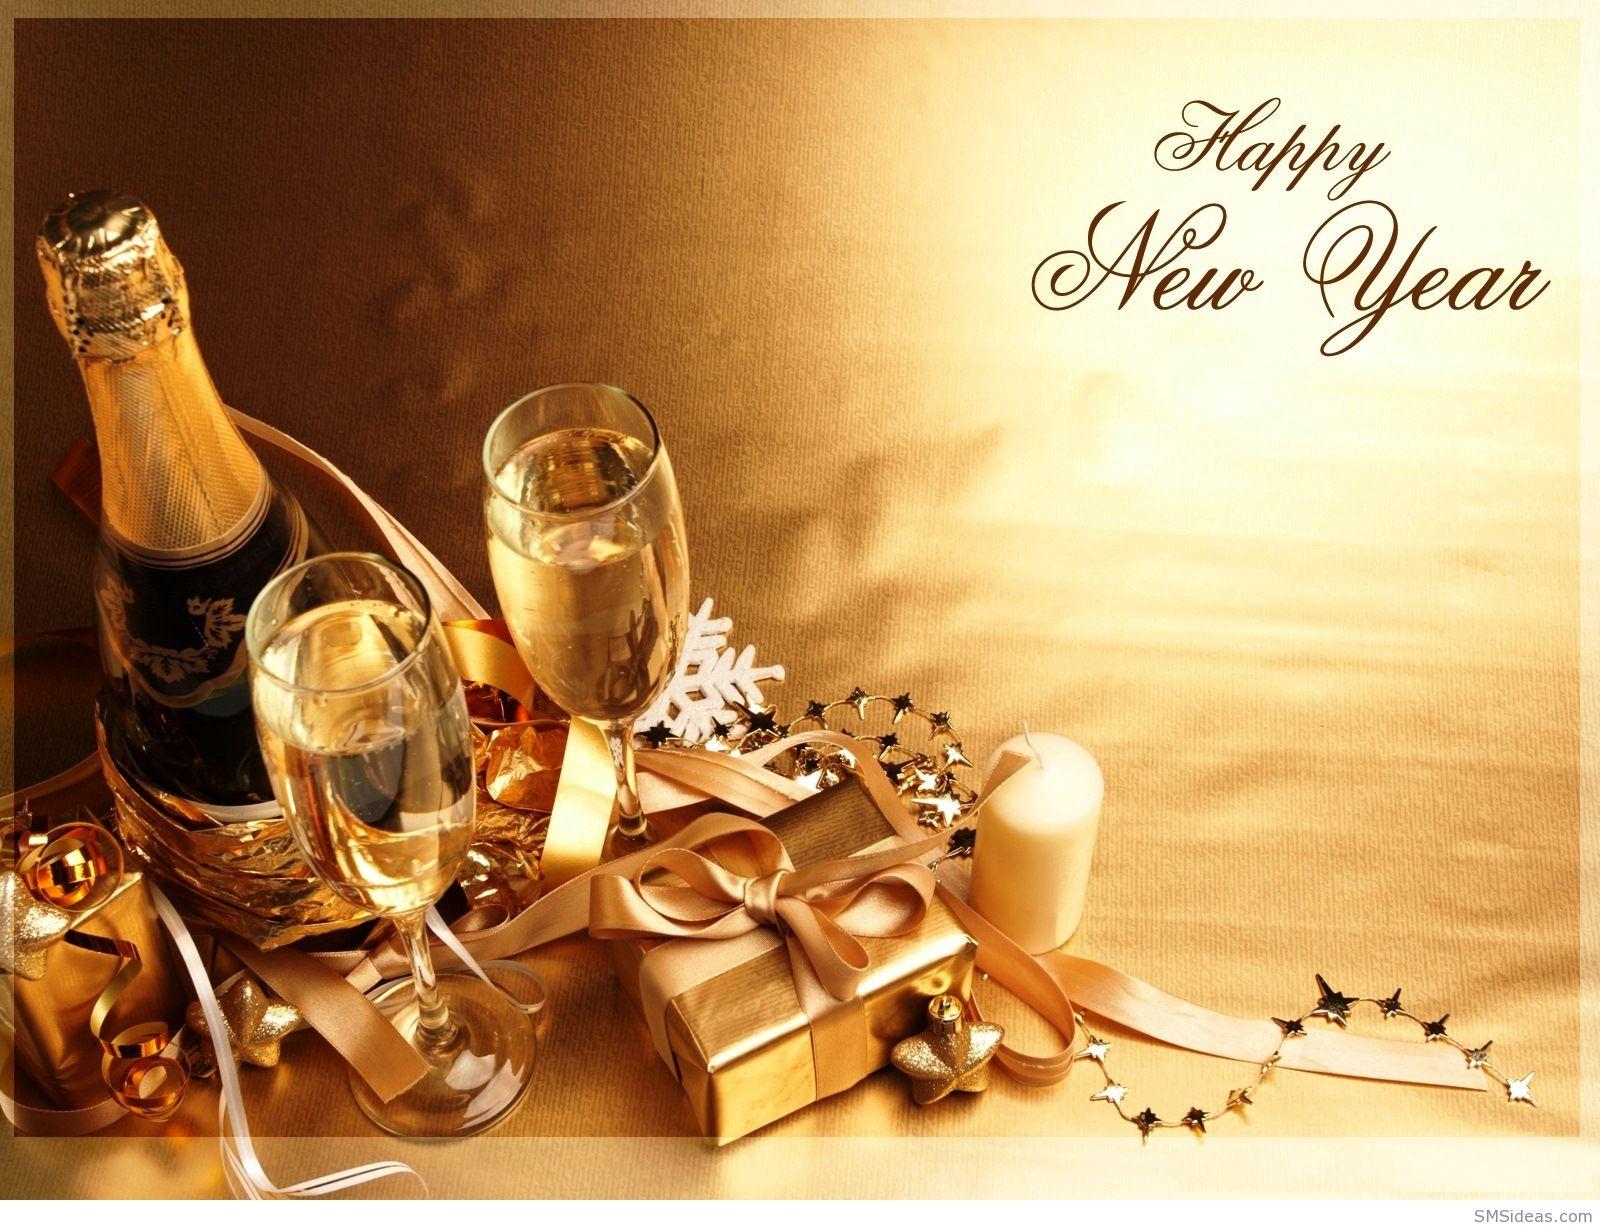 Happy New Year Wallpaper 2015 PC Free Download Wallpaper